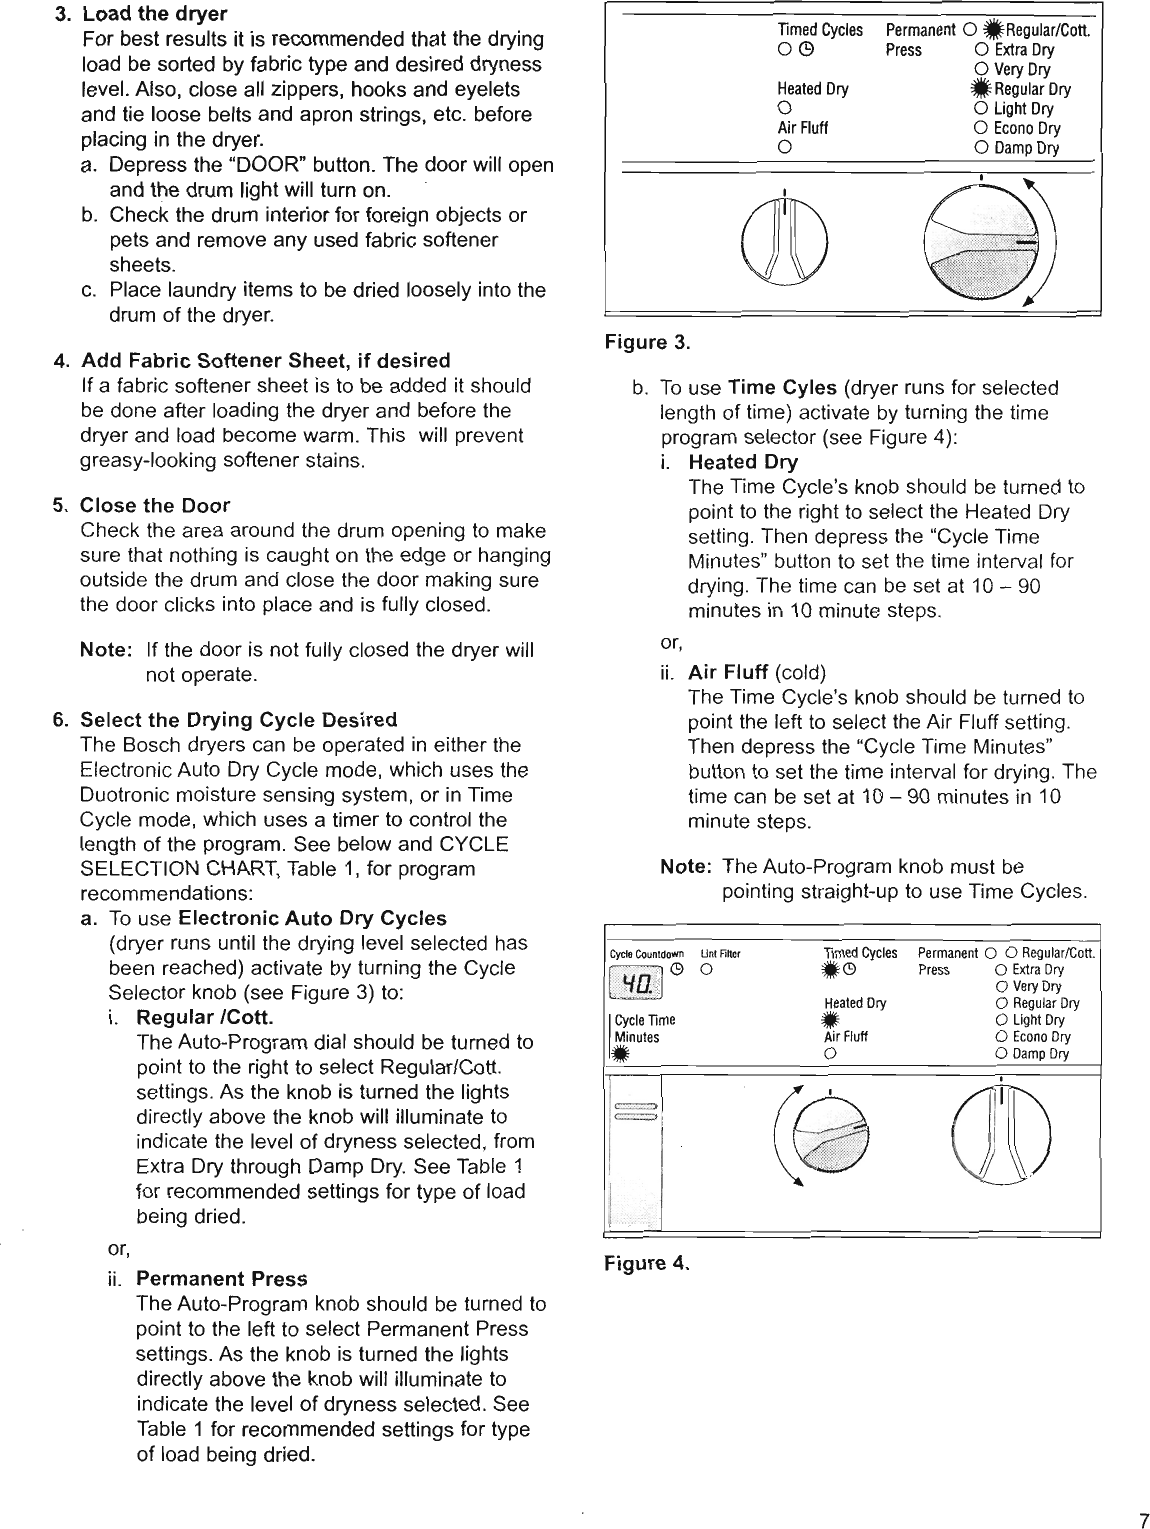 Page 7 of 12 - Boschhome Boschhome-Bosch-Appliances-Clothes-Dryer-Wta-3500-Users-Manual- Use & Care Manual For Bosch WTA 3500 And WTL 5400 Dryers  Boschhome-bosch-appliances-clothes-dryer-wta-3500-users-manual